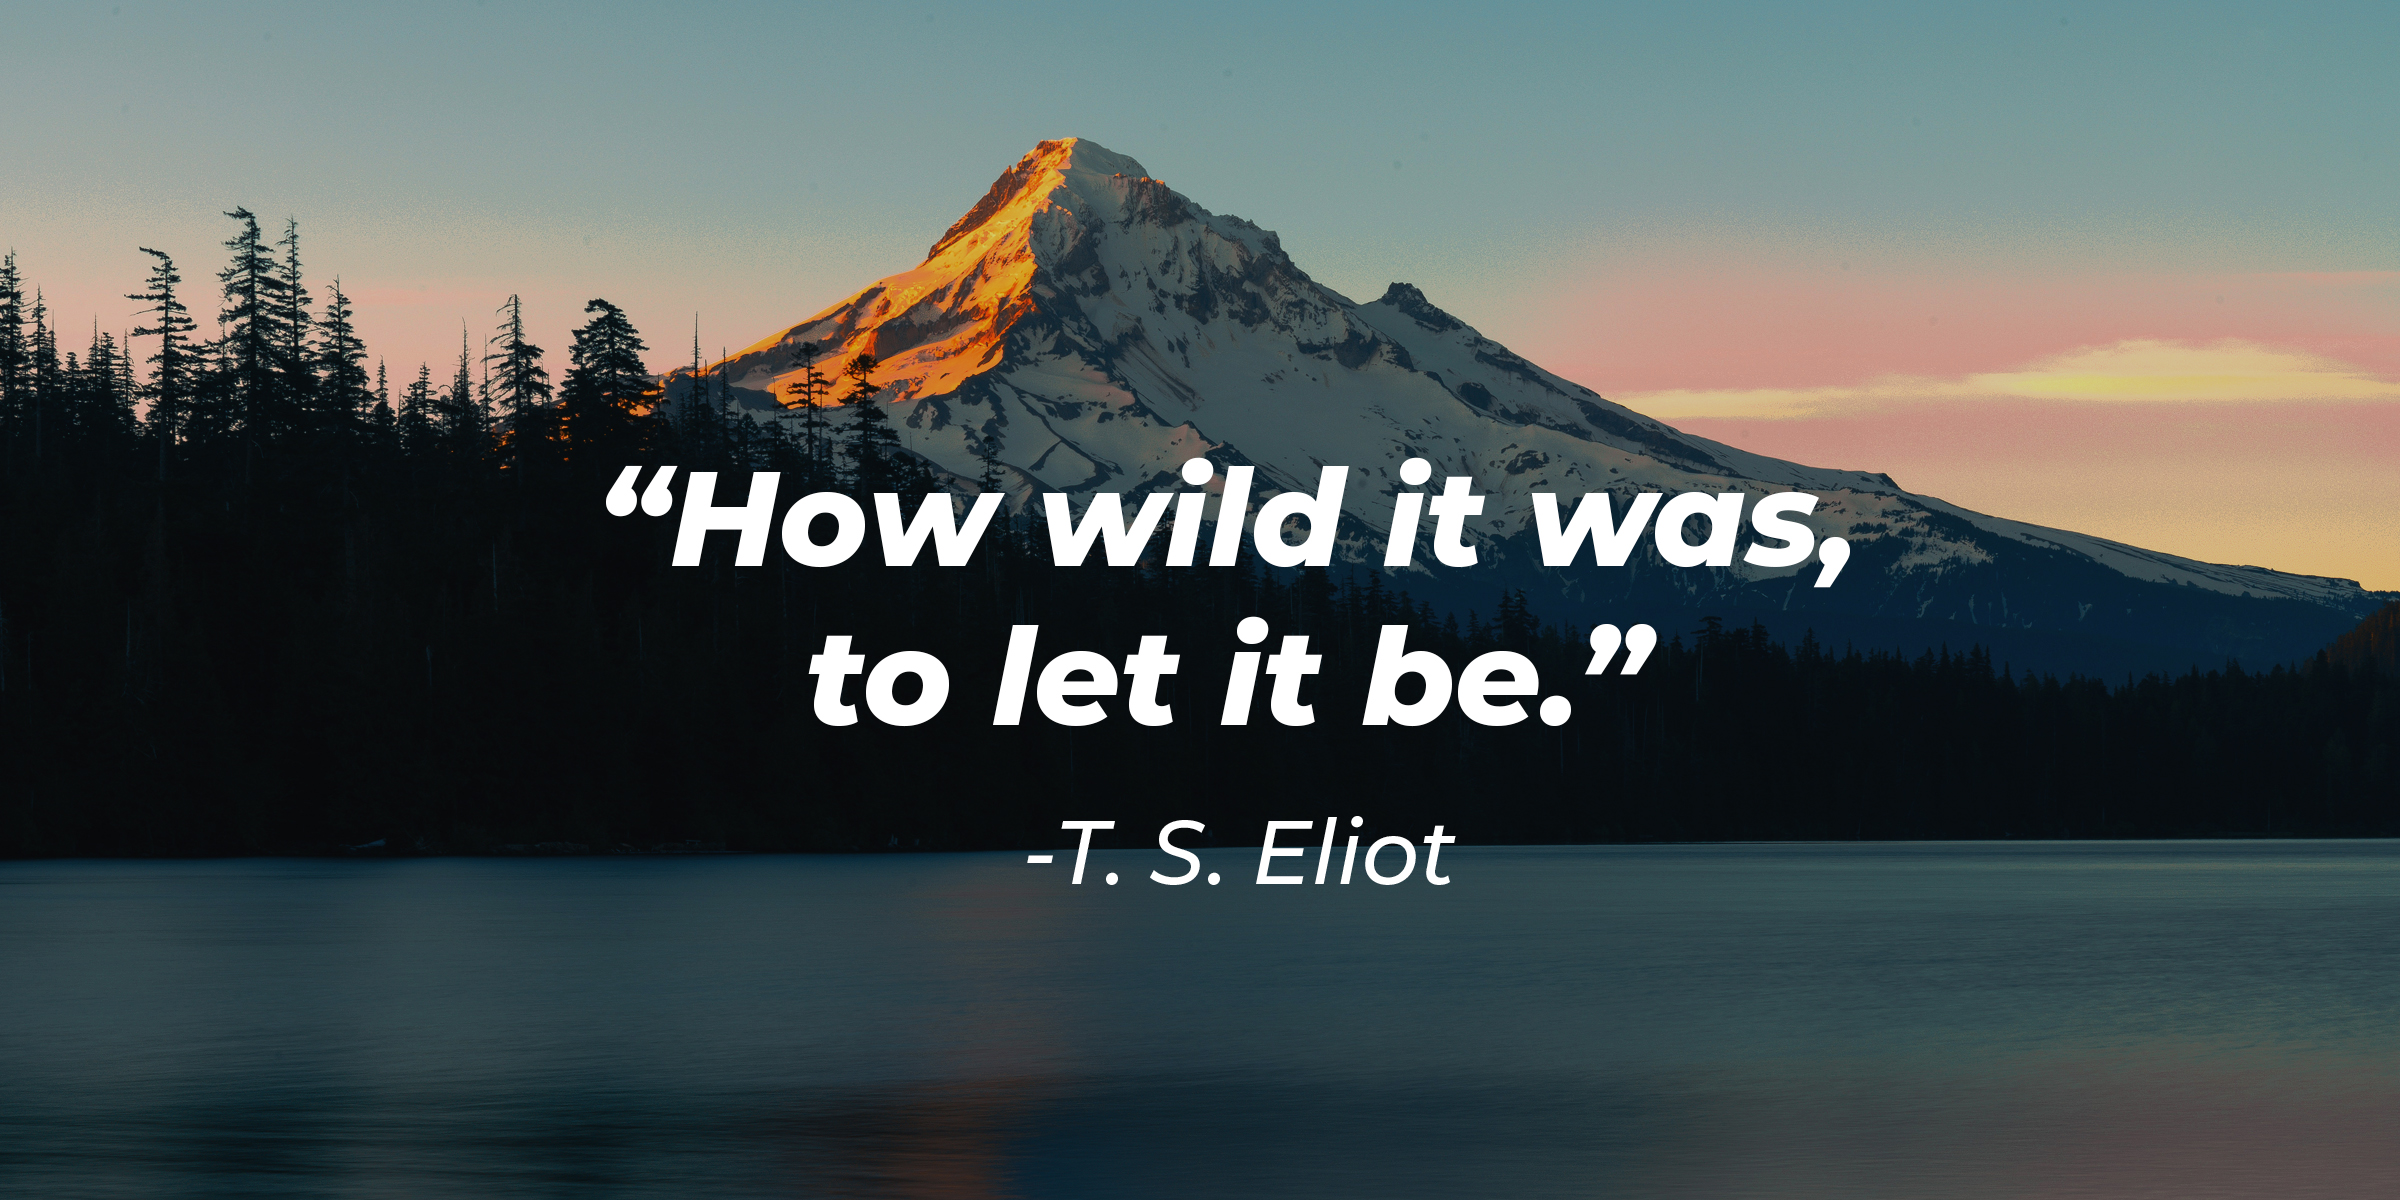 T. S. Elliot's quote: "How wild it was, to let it be." | Image: AmoDays